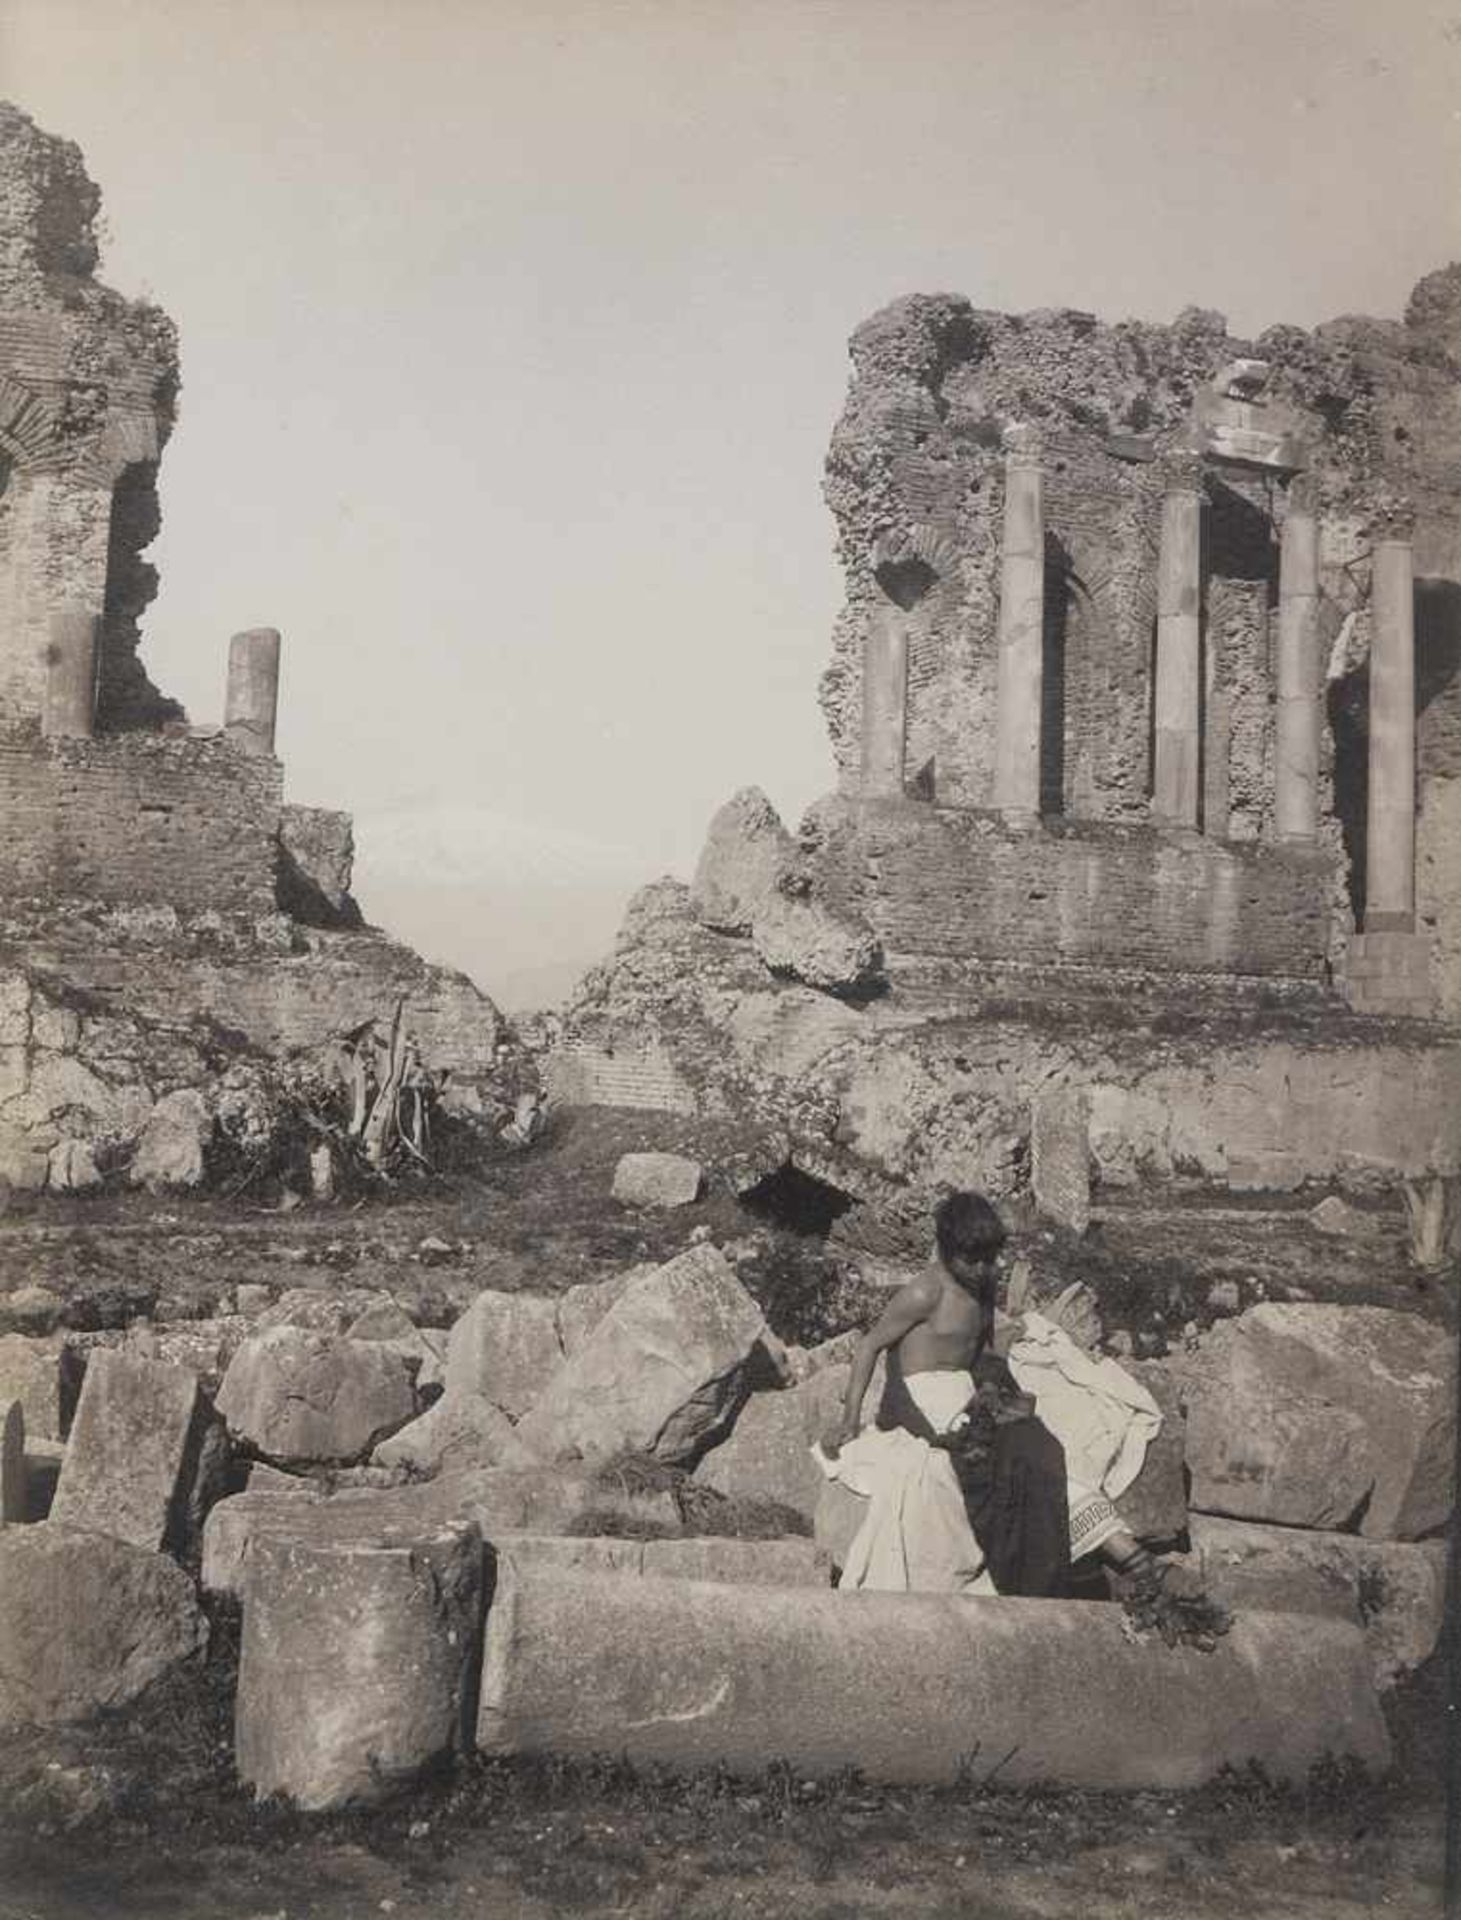 Gloeden, Wilhelm von: Selected images Selected images of Taormina and surroundings. Circa 1900. 5